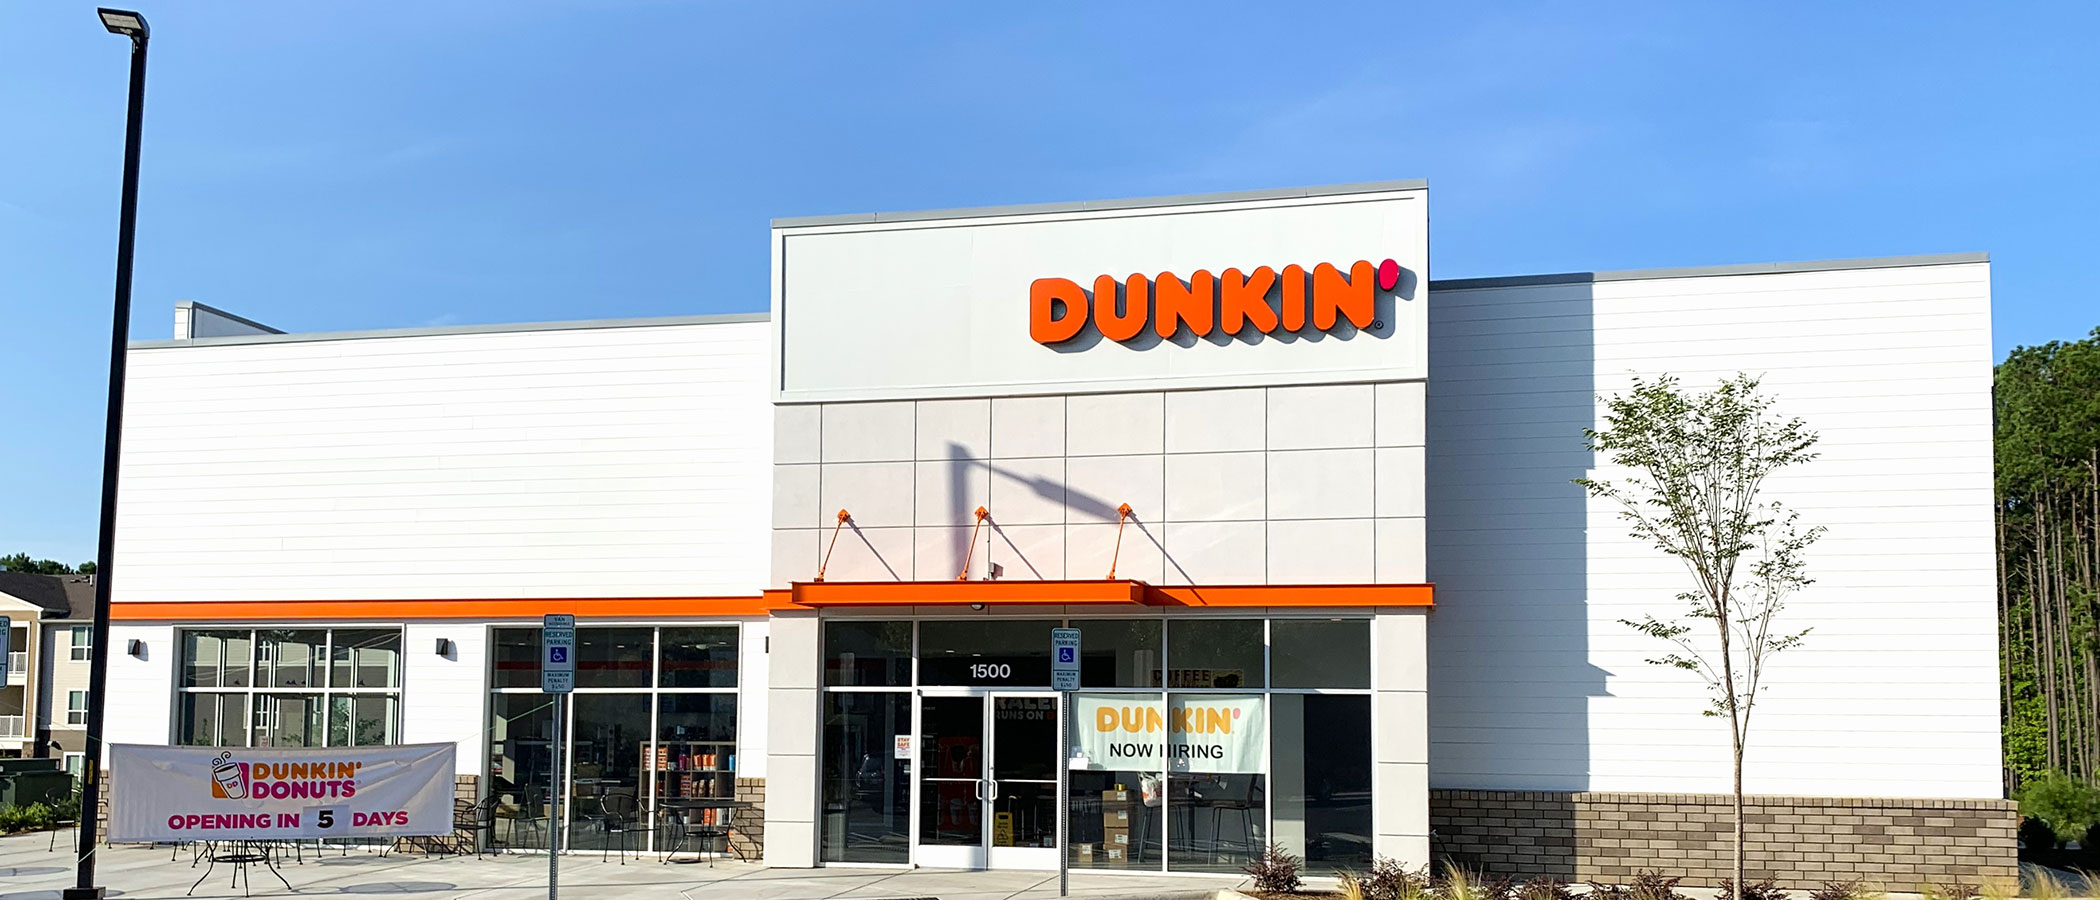 Dunkin Donuts locations